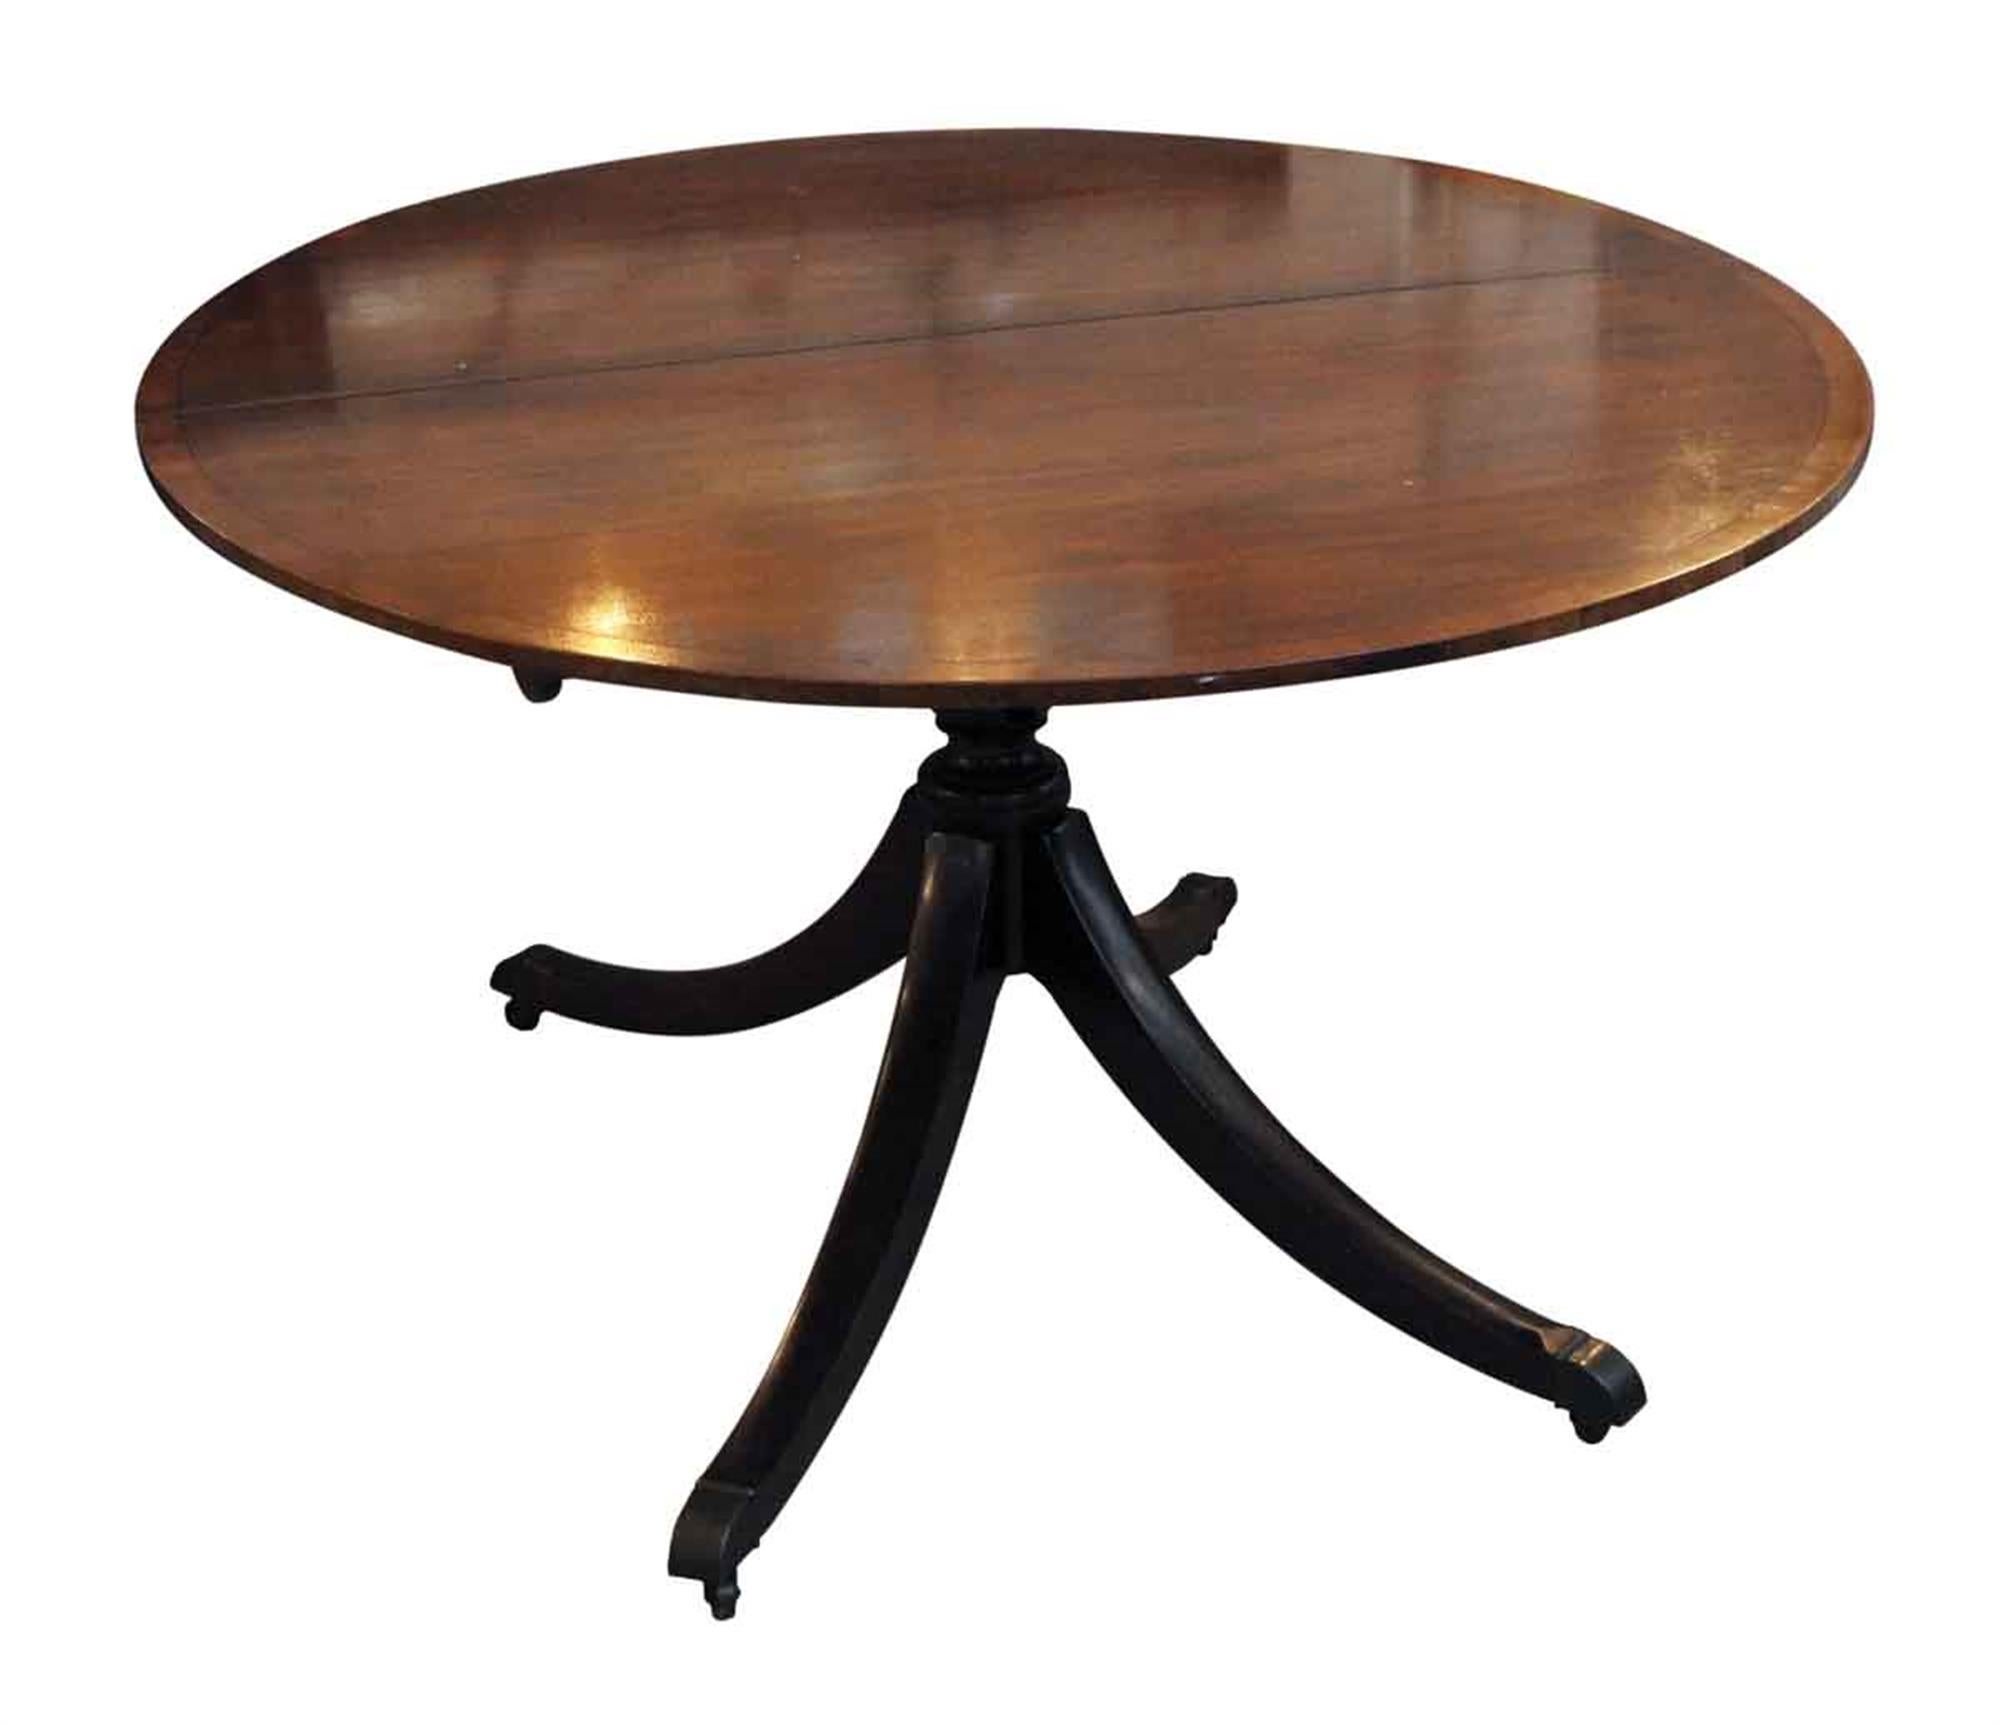 1970s Duncan Phyfe style oval mahogany dining table with two extensions on wheels. This can be seen at our 5 East 16th St location on Union Square in Manhattan.